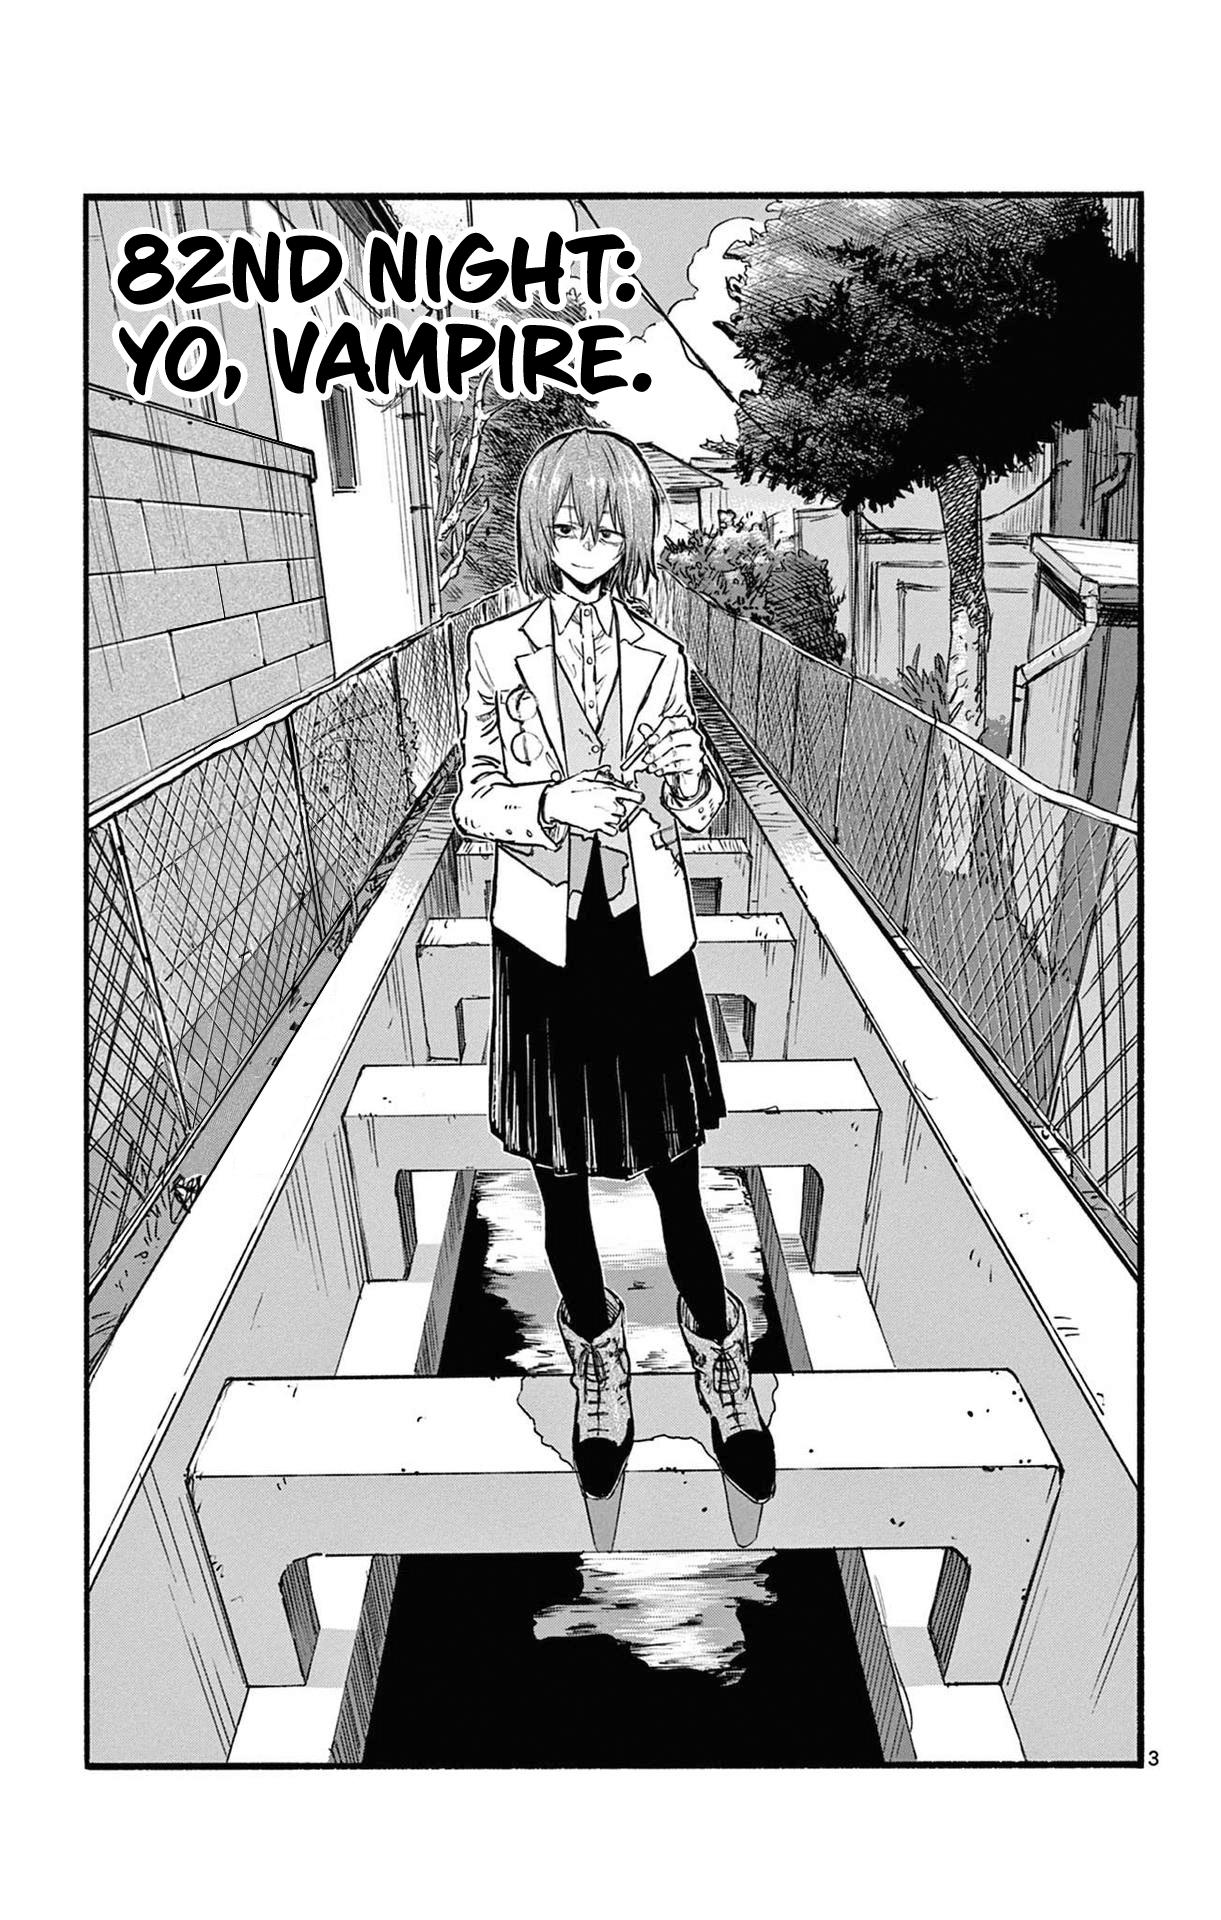 Read Song Of The Night Walkers Vol.9 Chapter 82: Yo, Vampire. - Manganelo